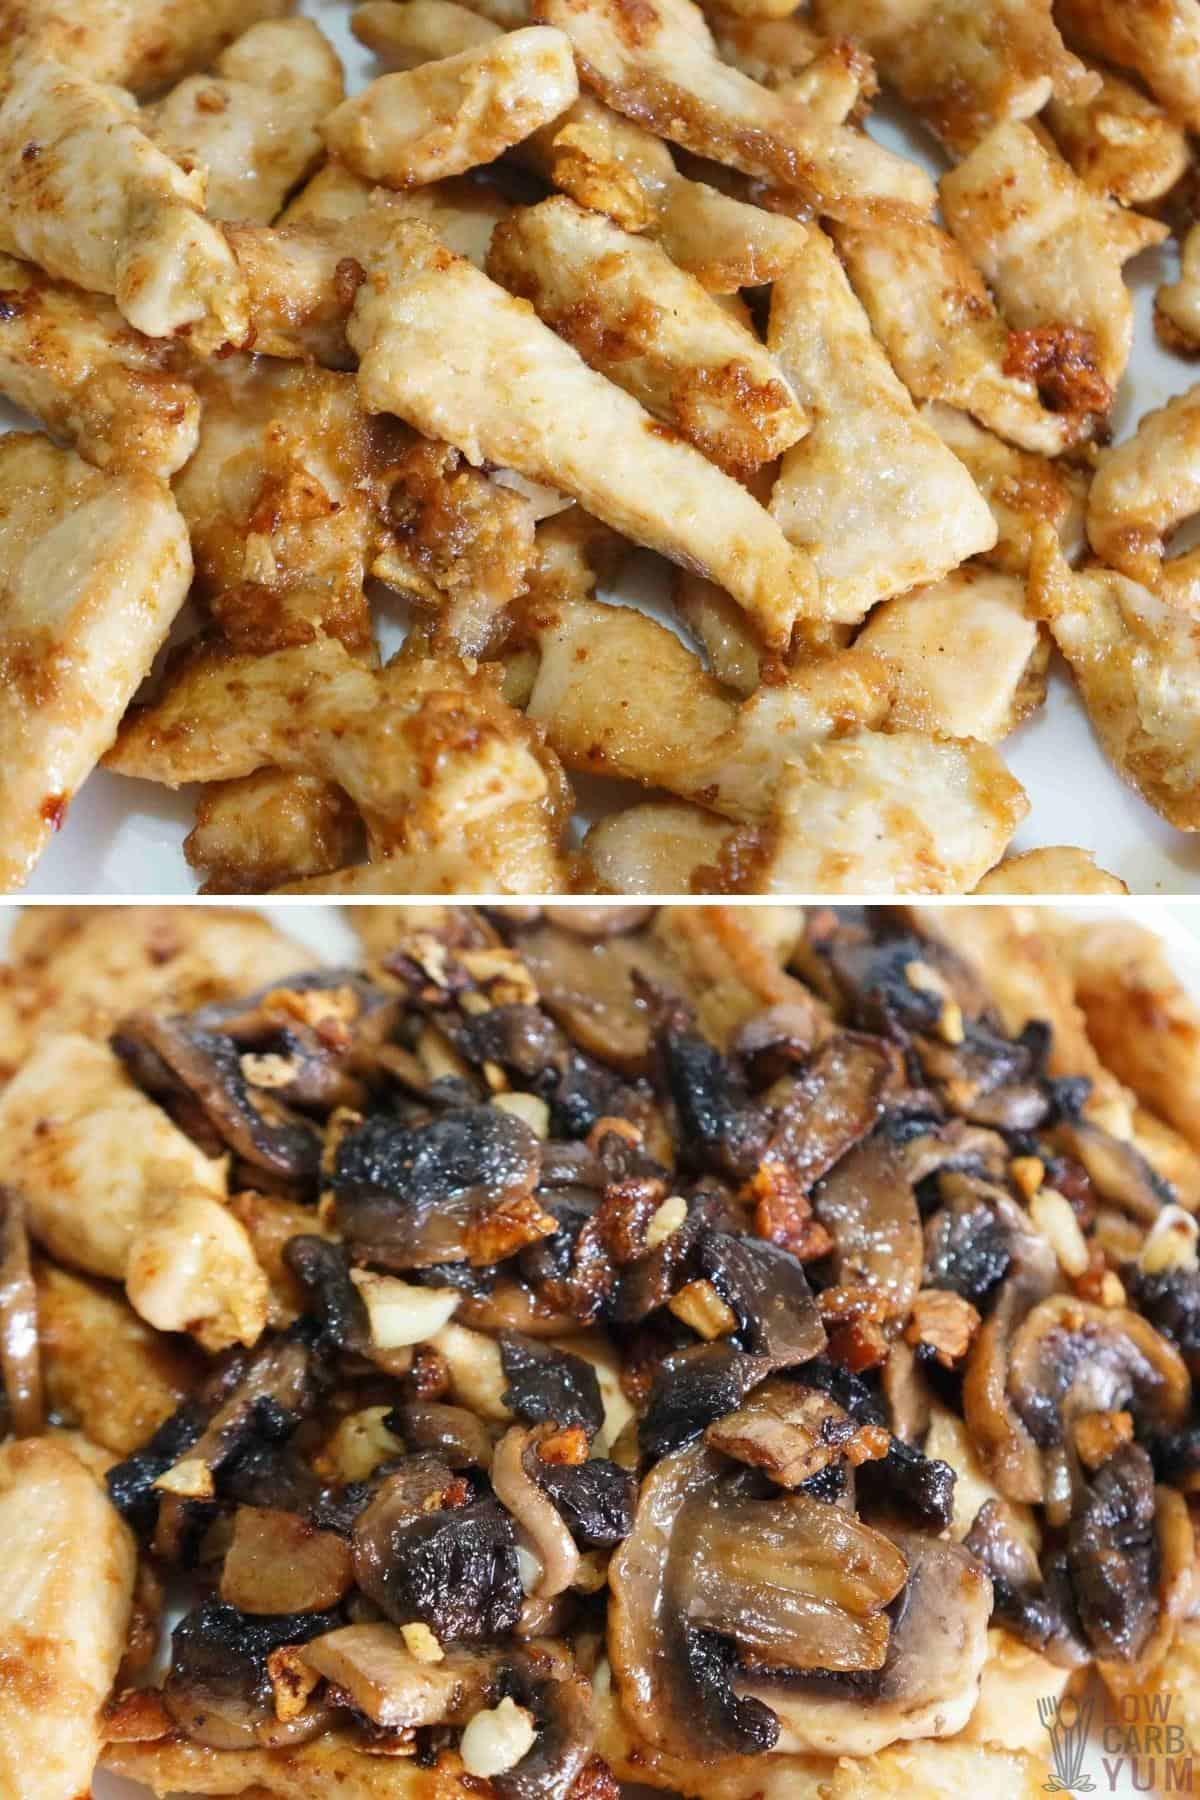 cooked chicken and mushrooms with garlic.